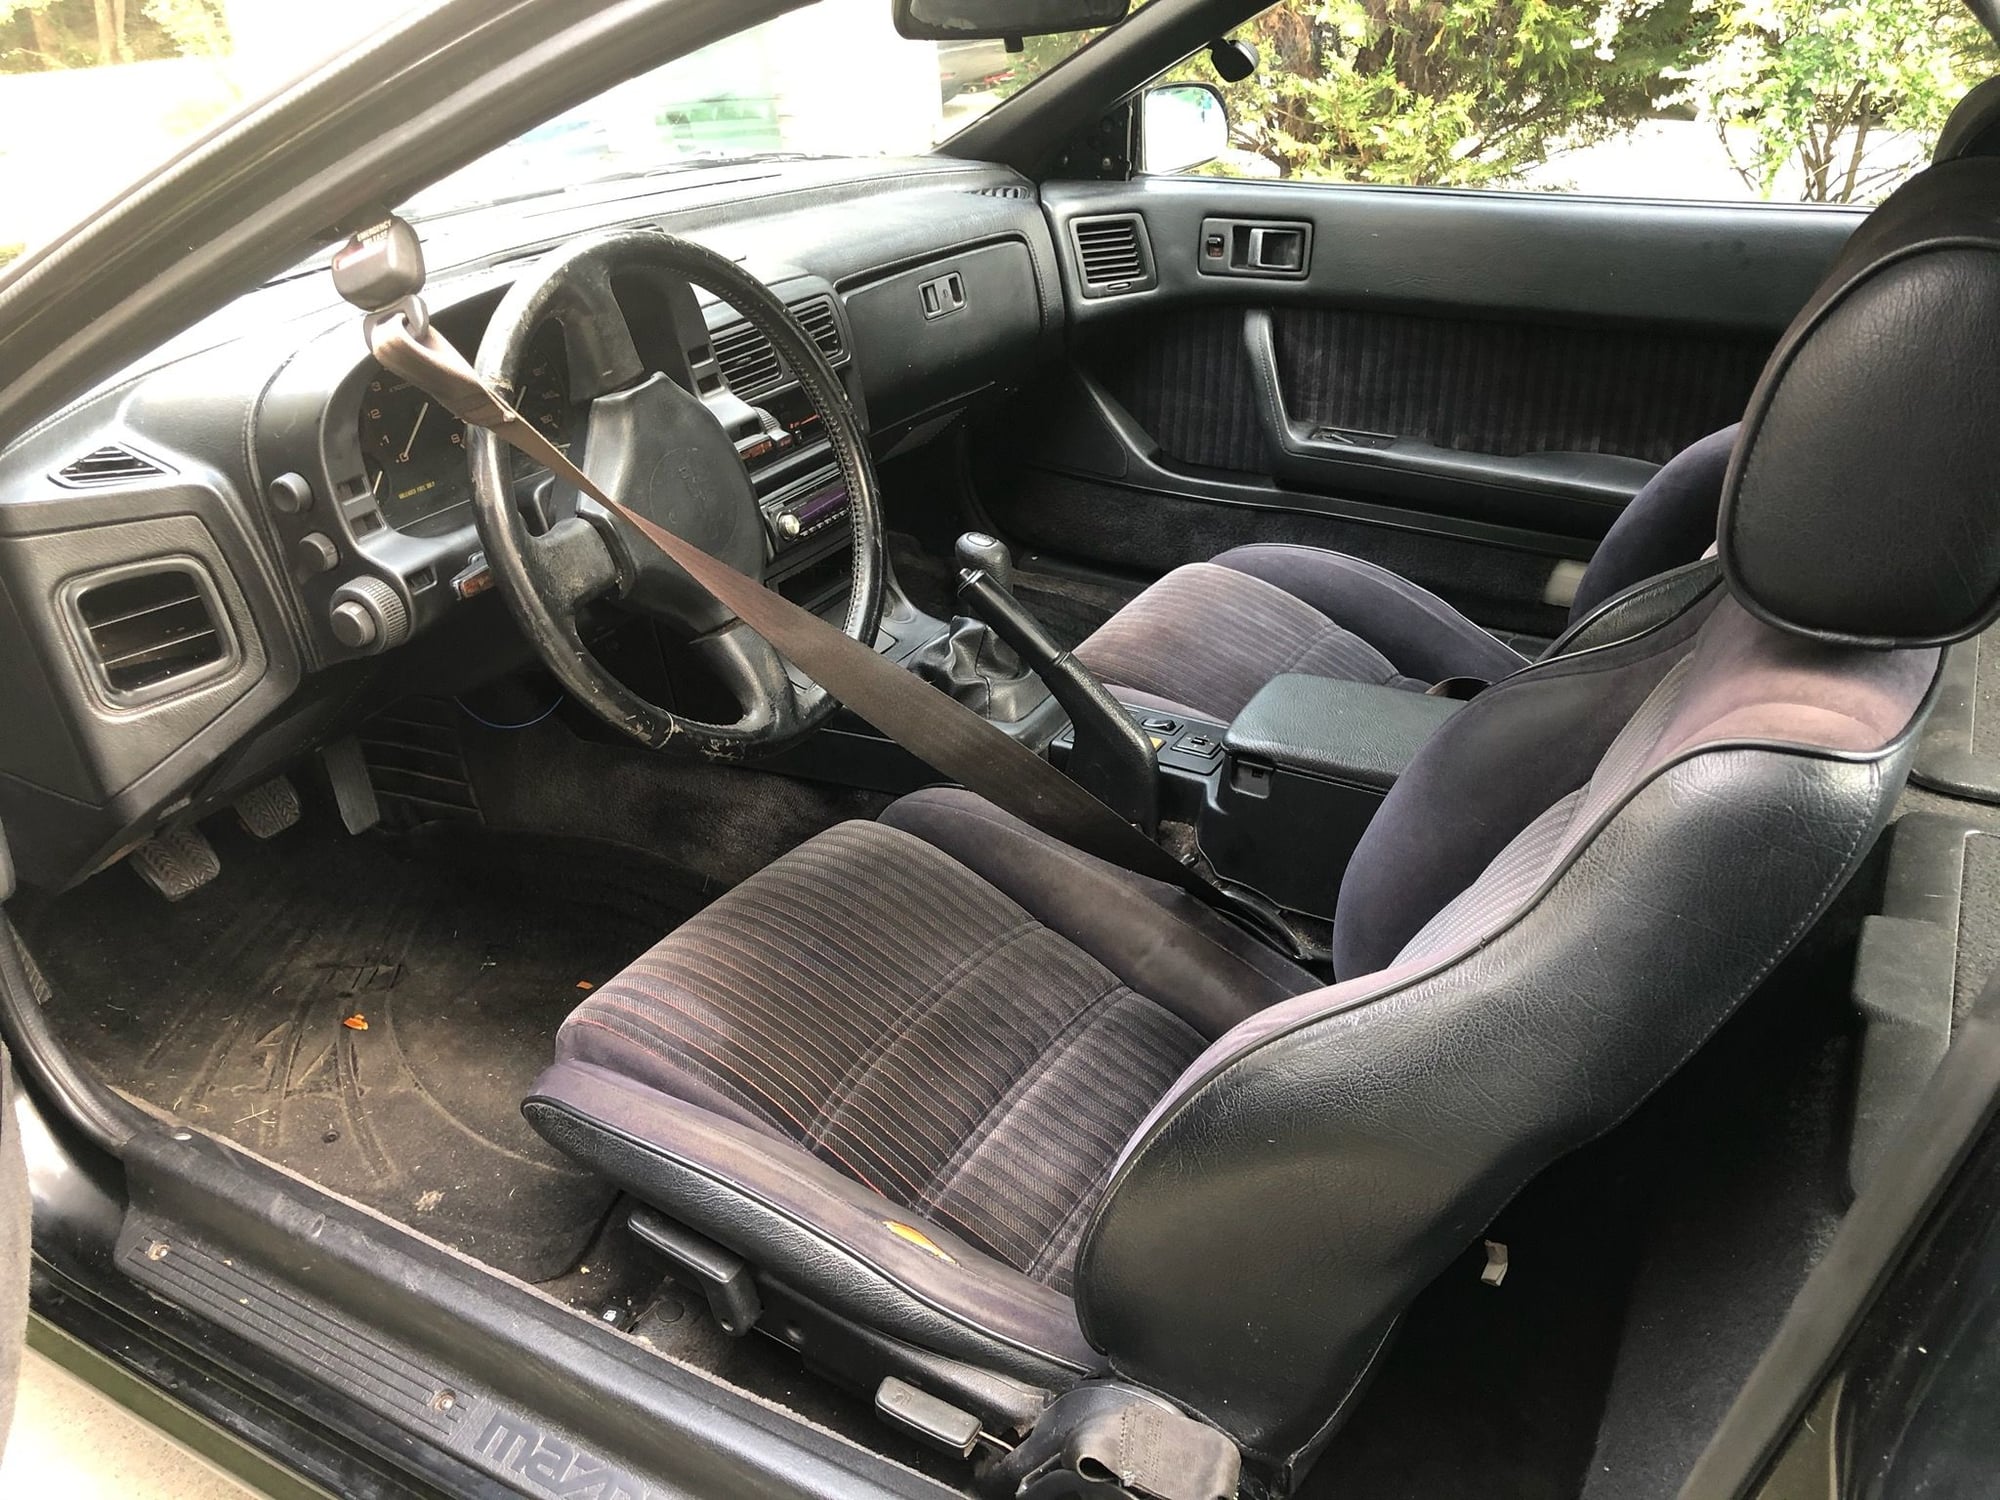 1990 Mazda RX-7 - 1990 2nd Gen RX7 Coupe Black Survivor - Used - VIN JM1FC3310L0800034 - 158,000 Miles - Other - 2WD - Manual - Coupe - Black - Indian Trail, NC 28104, United States